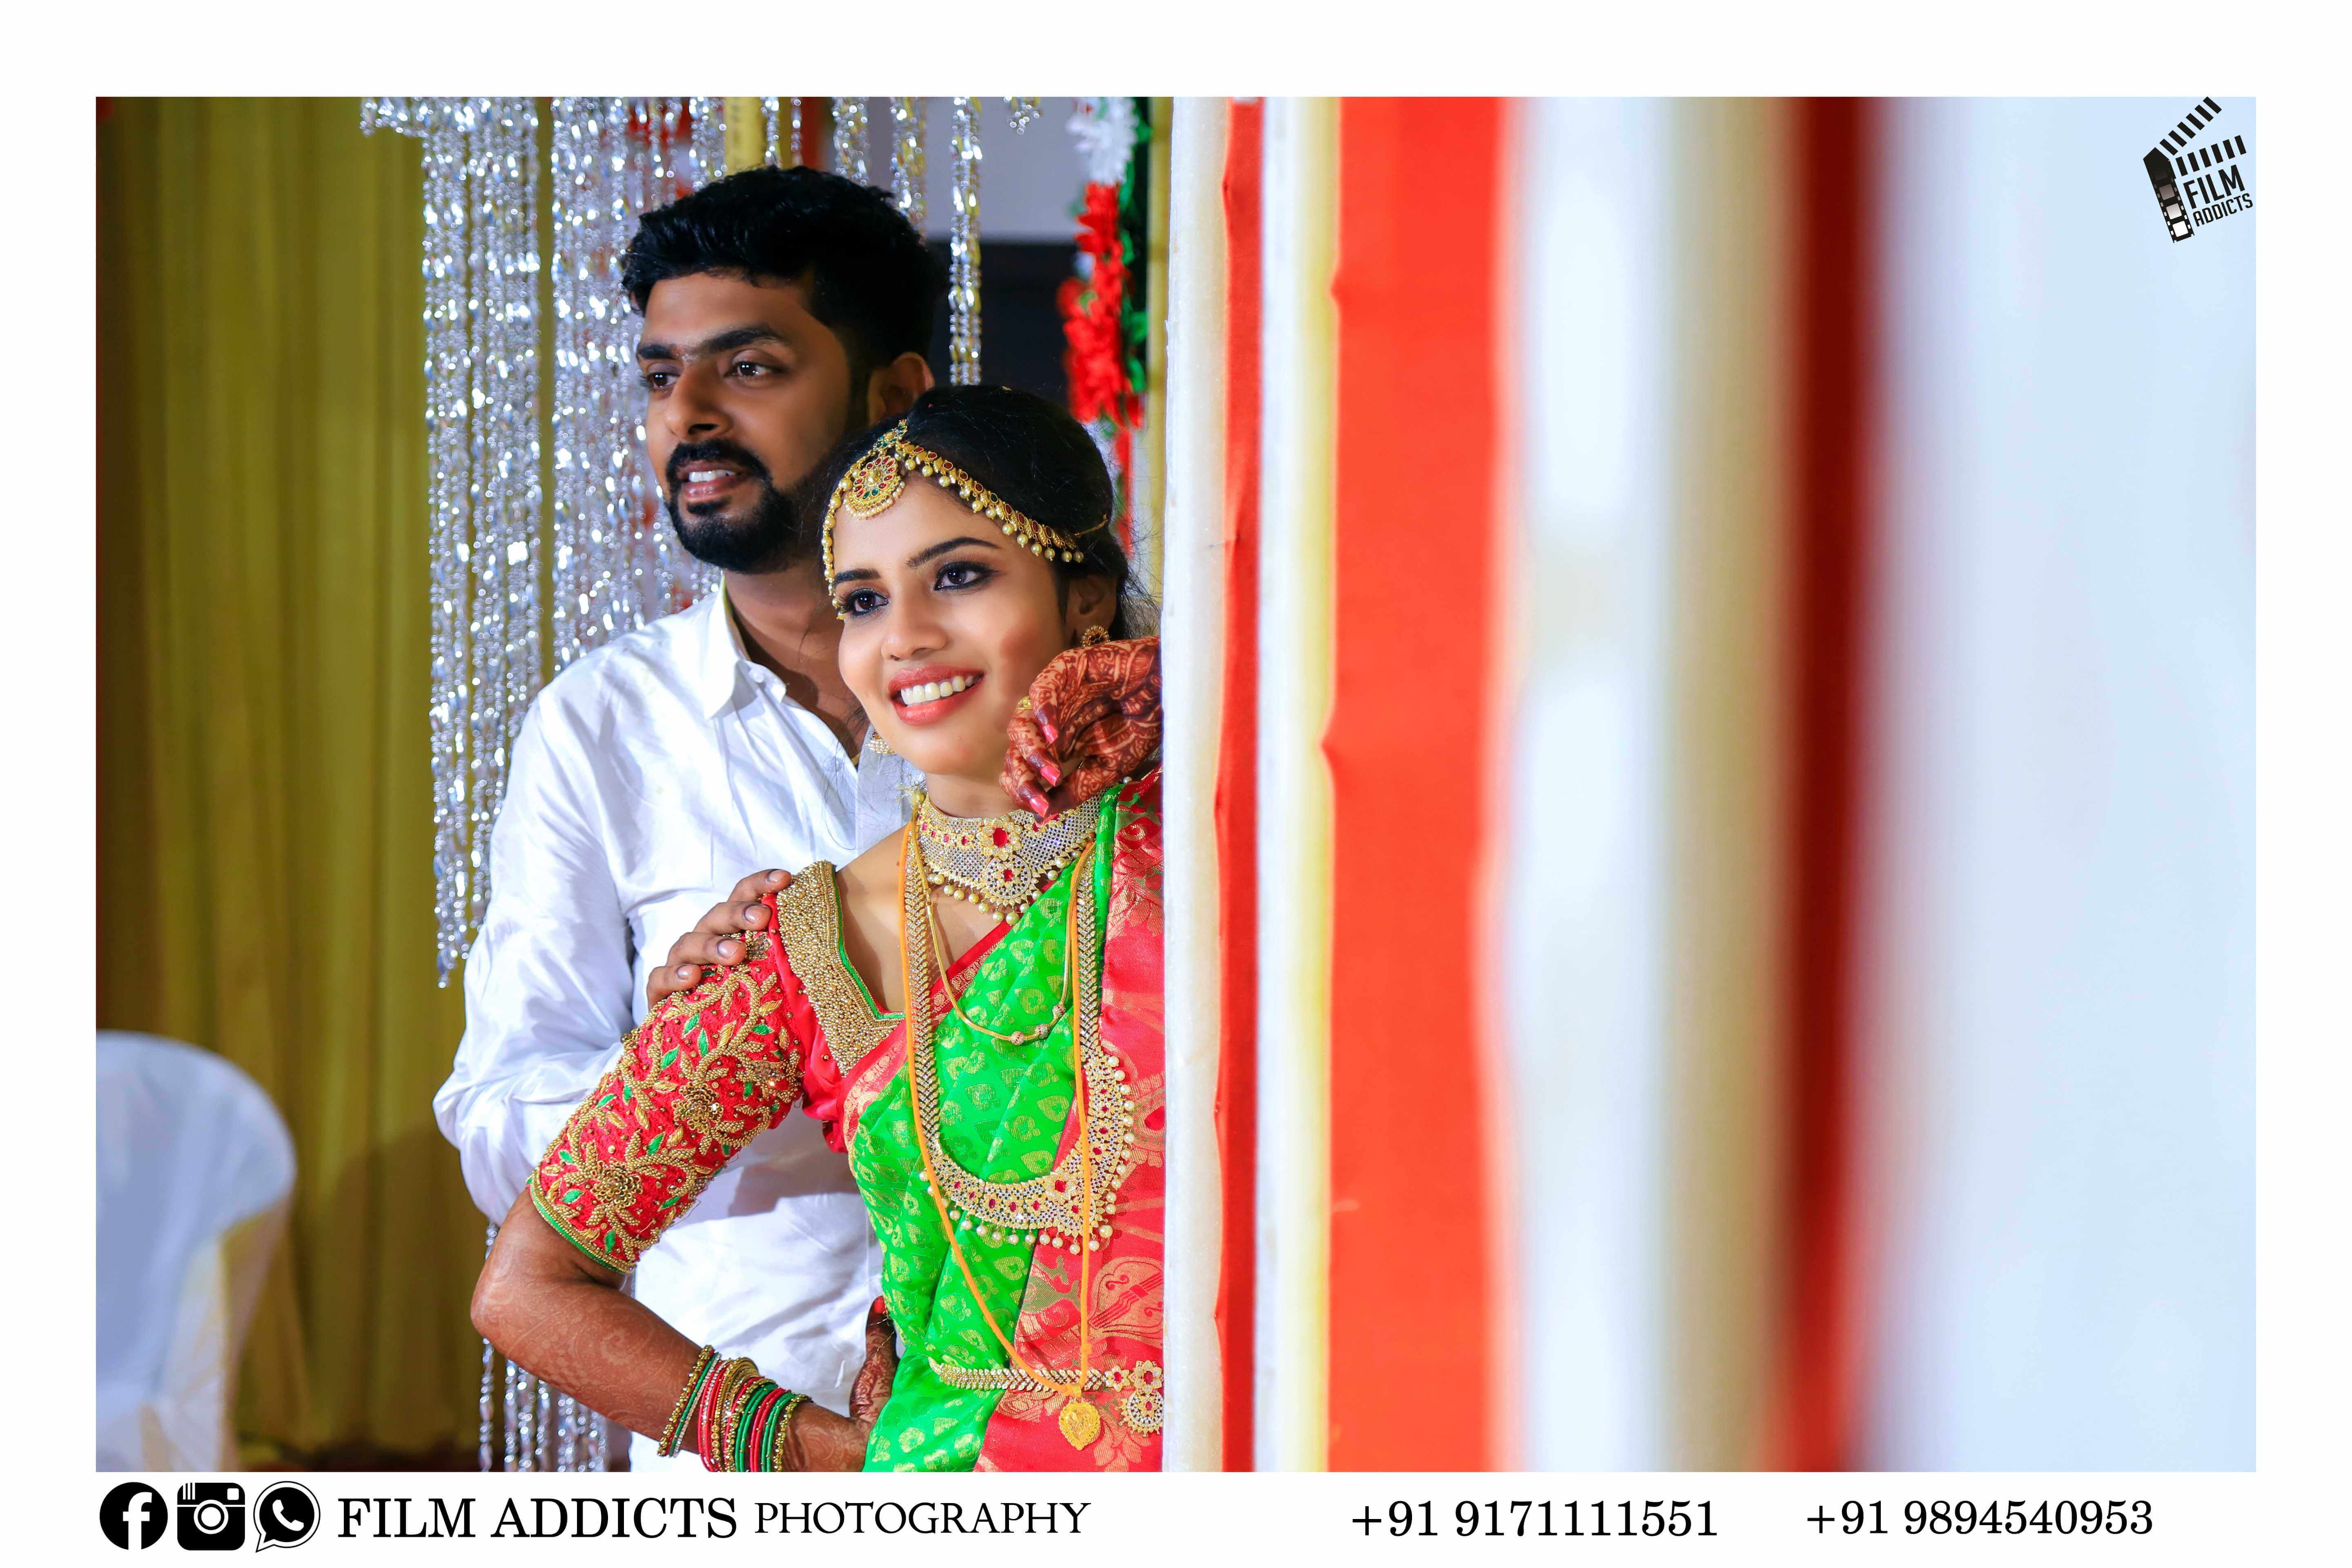 Best Christian Wedding Photographers in Trichy,Best Christian photography in Trichy,Best candid photographers in Trichy,Best candid photography in Trichy,Best marriage photographers in Trichy,Best marriage photography in Trichy,Best photographers in Trichy,Best photography in Trichy,Best Christian candid photography in Trichy,Best Christian candid photographers in Trichy,Best Christian video in Trichy,Best Christian videographers in Trichy,Best Christian videography in Trichy,Best candid videographers in Trichy,Best candid videography in Trichy,Best marriage videographers in Trichy,Best marriage videography in Trichy,Best videographers in Trichy,Best videography in Trichy,Best Christian candid videography in Trichy,Best Christian candid videographers in Trichy,Best helicam operators in Trichy,Best drone operators in Trichy,Best Christian studio in Trichy,Best Christian Wedding Photographers in Trichy,Best Christian photography in Trichy,No.1 Christian photographers in Trichy,No.1 Christian photography in Trichy,Trichy Christian photographers,Trichy Christian photography,Trichy Christian videos,Best candid videos in Trichy,Best candid photos in Trichy,Best helicam operators photography in Trichy,Best helicam operator photographers in Trichy,Best Christian videography in Trichy,Best Christian photography in Trichy,Best Christian photography in Trichy,Best Christian Wedding Photographers in Trichy,Best drone operators photographers in Trichy,Best Christian candid videography in Trichy,tamilnadu Christian photography, tamilnadu.